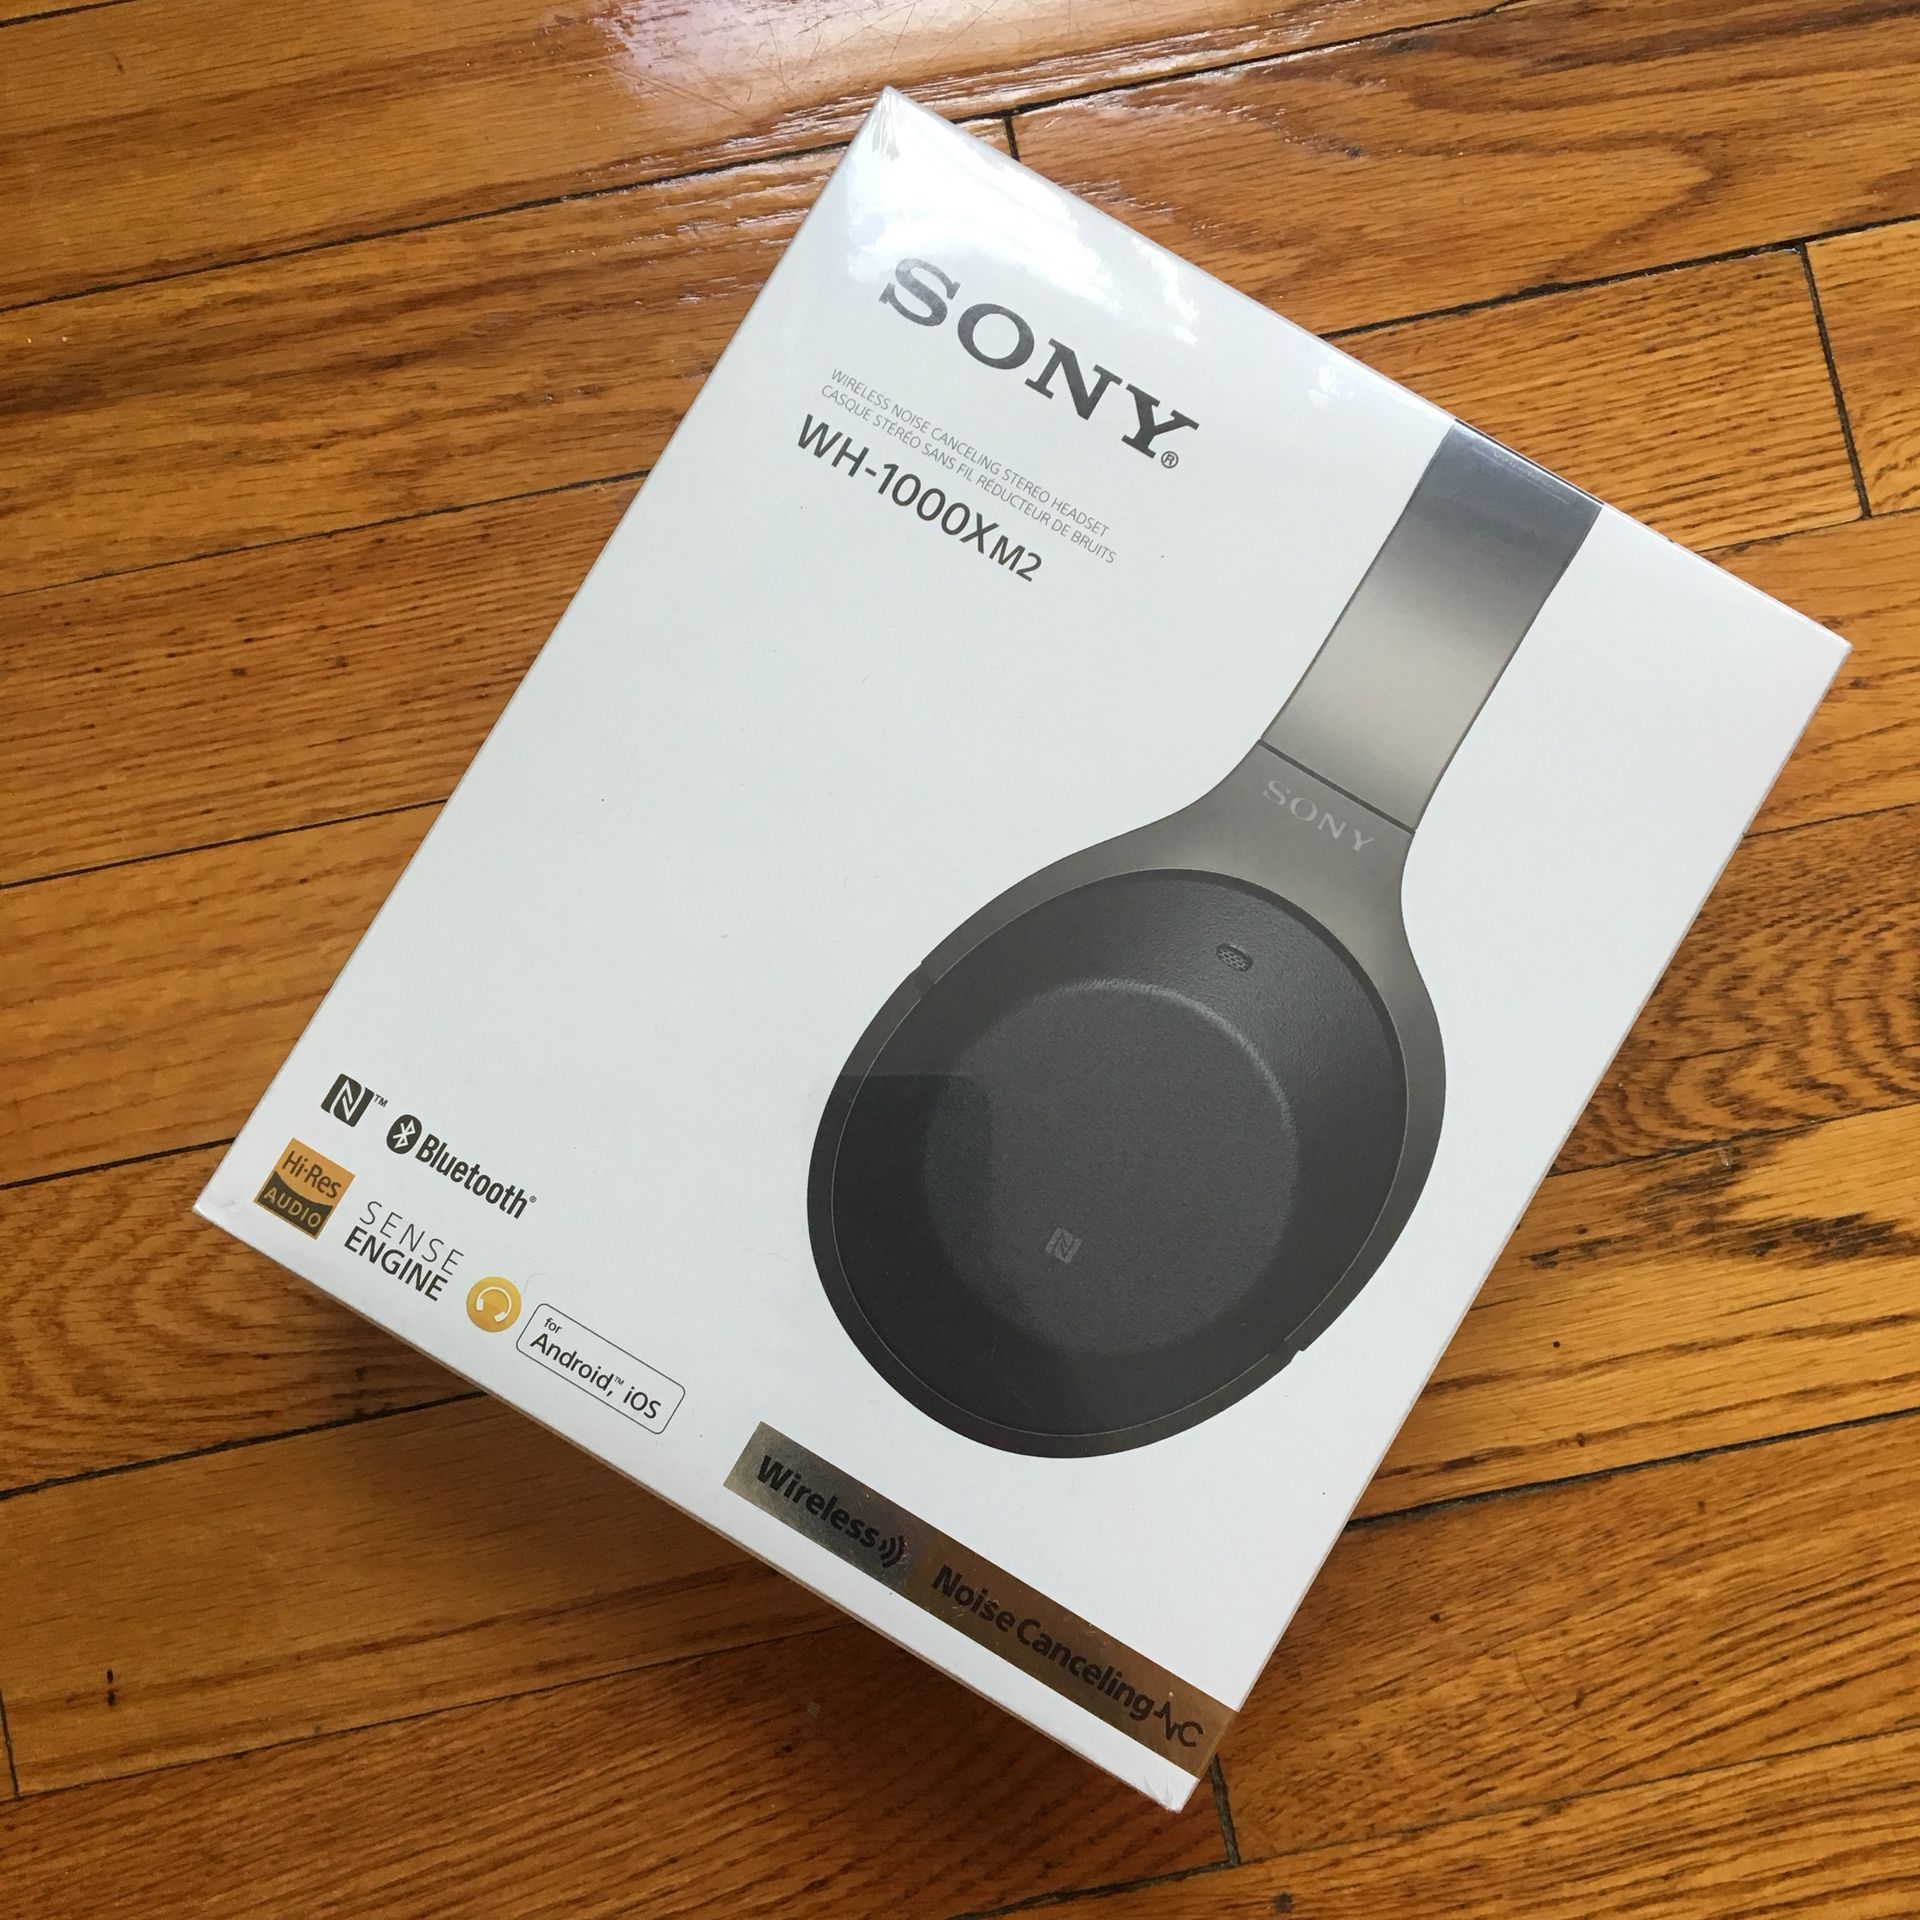 BRAND NEW Sony Noise Cancelling Headphones WH1000XM2: Over Ear Wireless Bluetooth Headphones with Microphone - Hi Res Audio and Active Sound Cancella